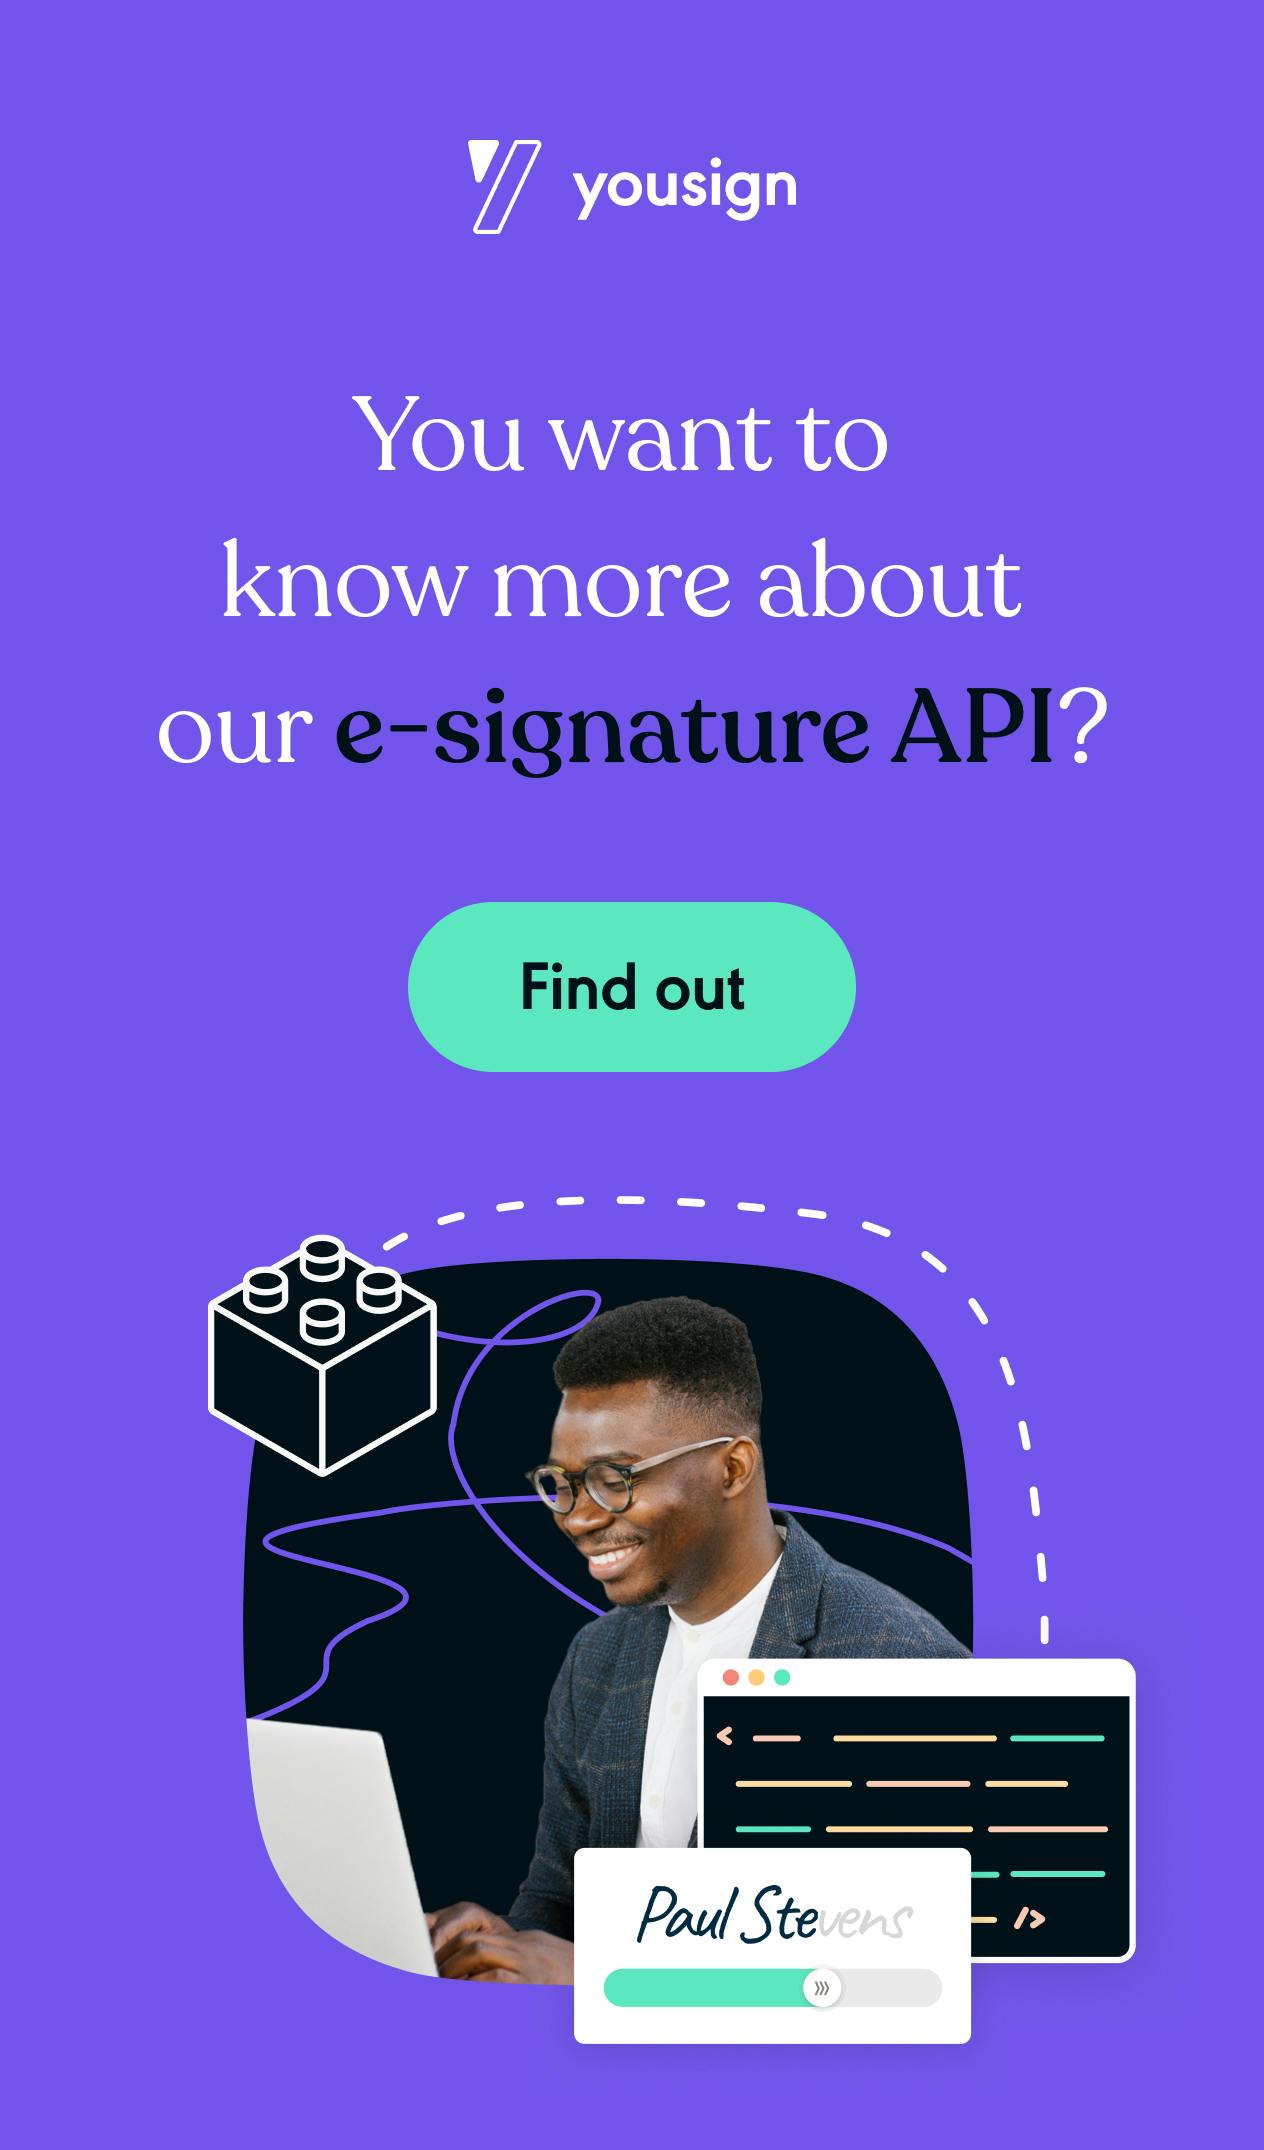 Know more about Yousign e-signature API